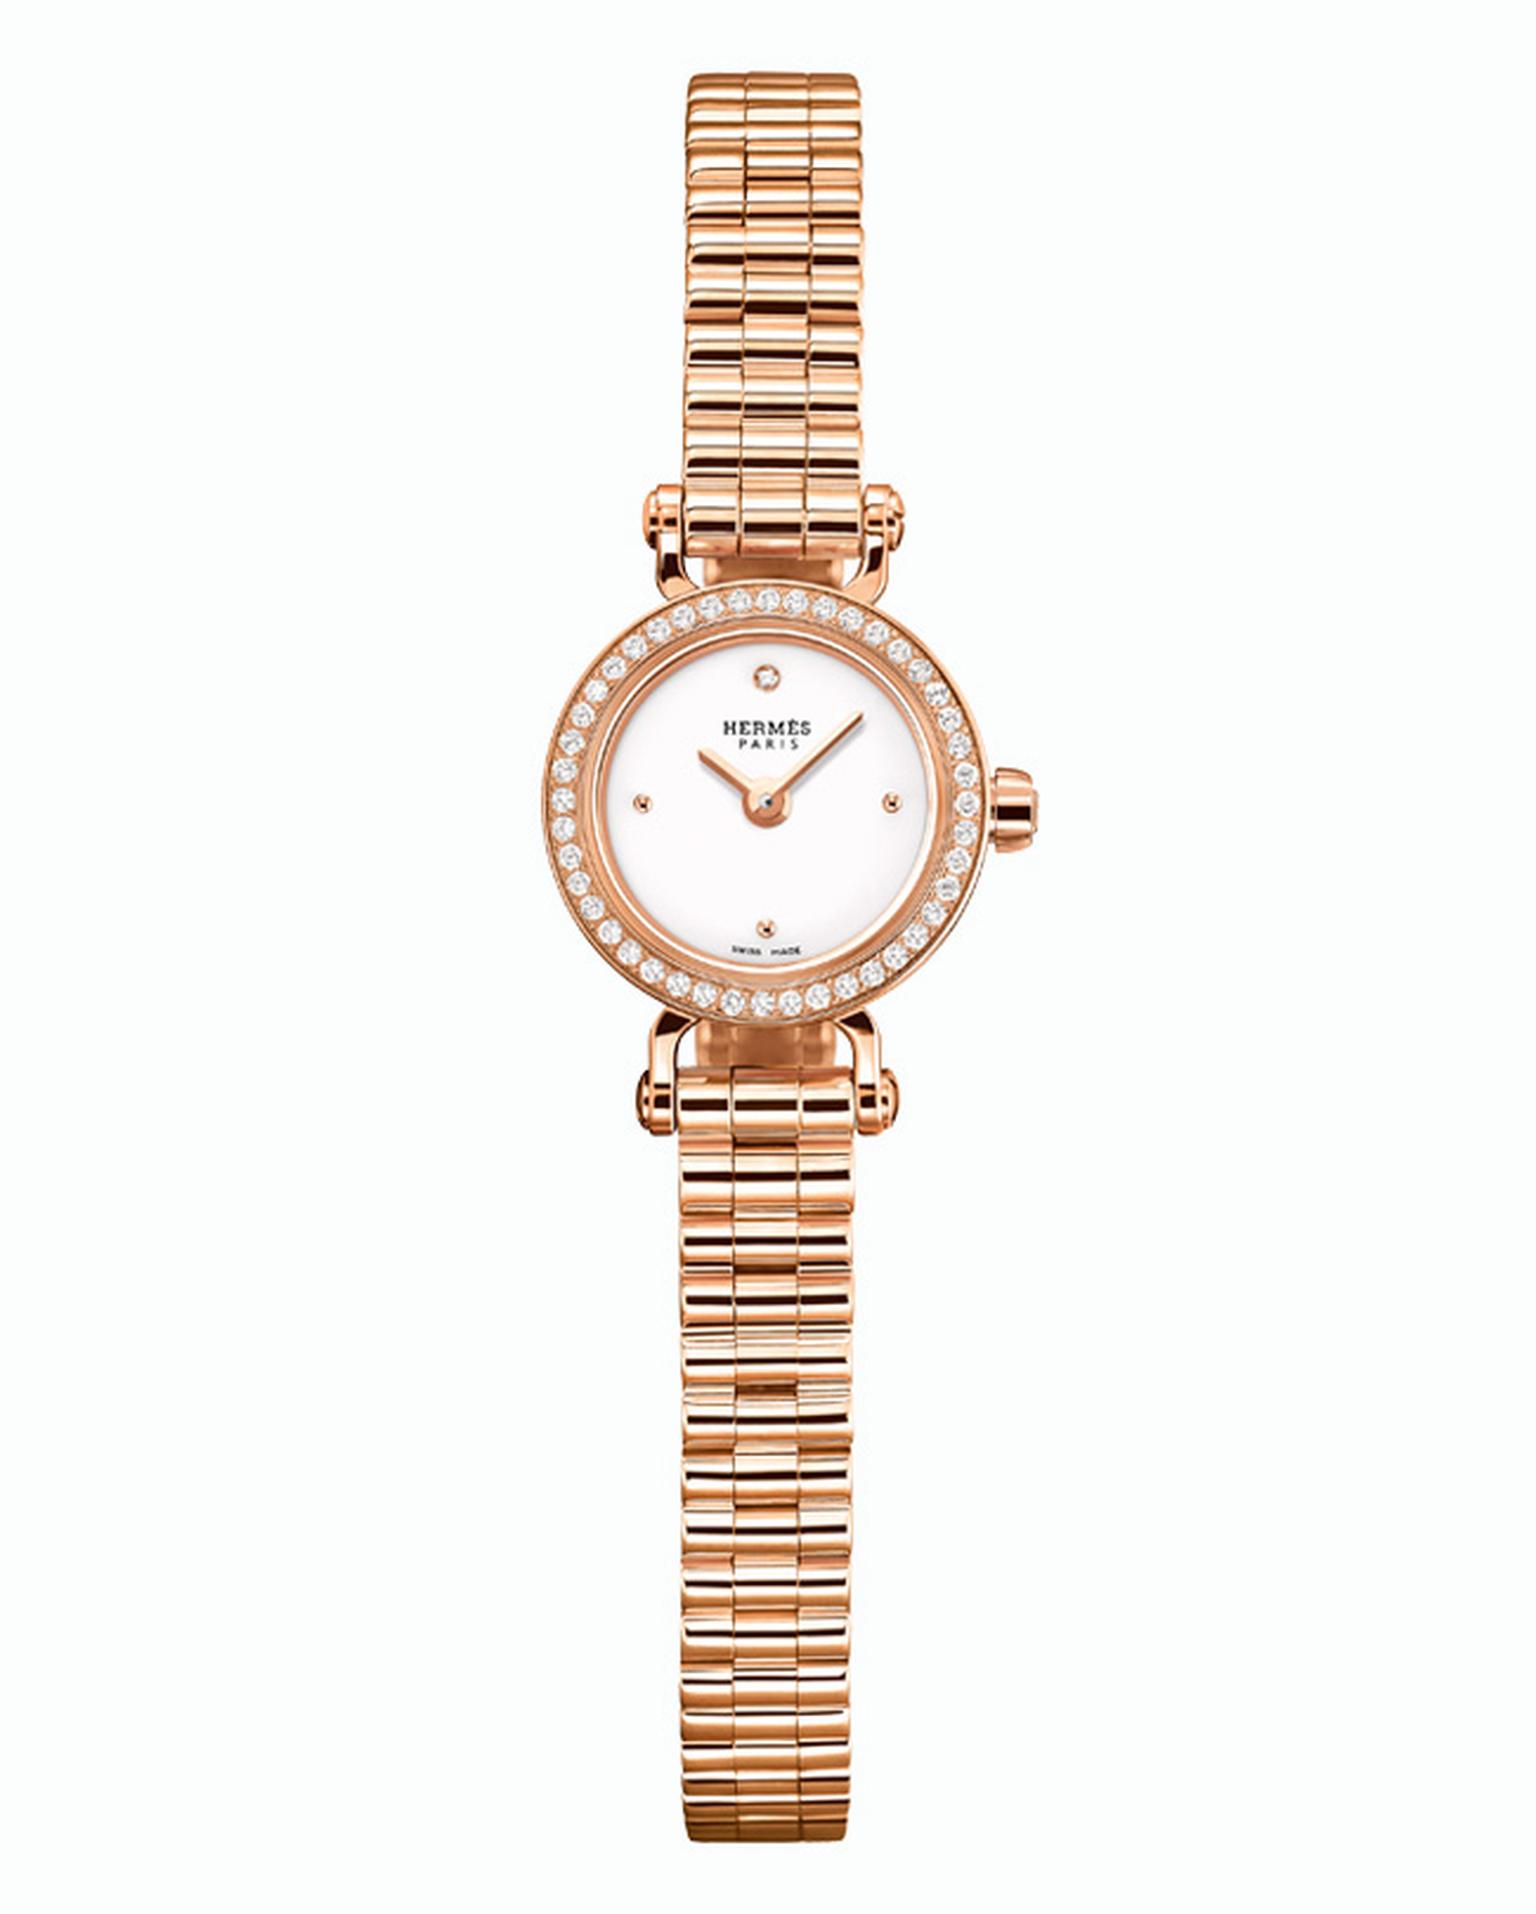 Hermes Faubourg watch in rose gold with diamonds_20140131_Main